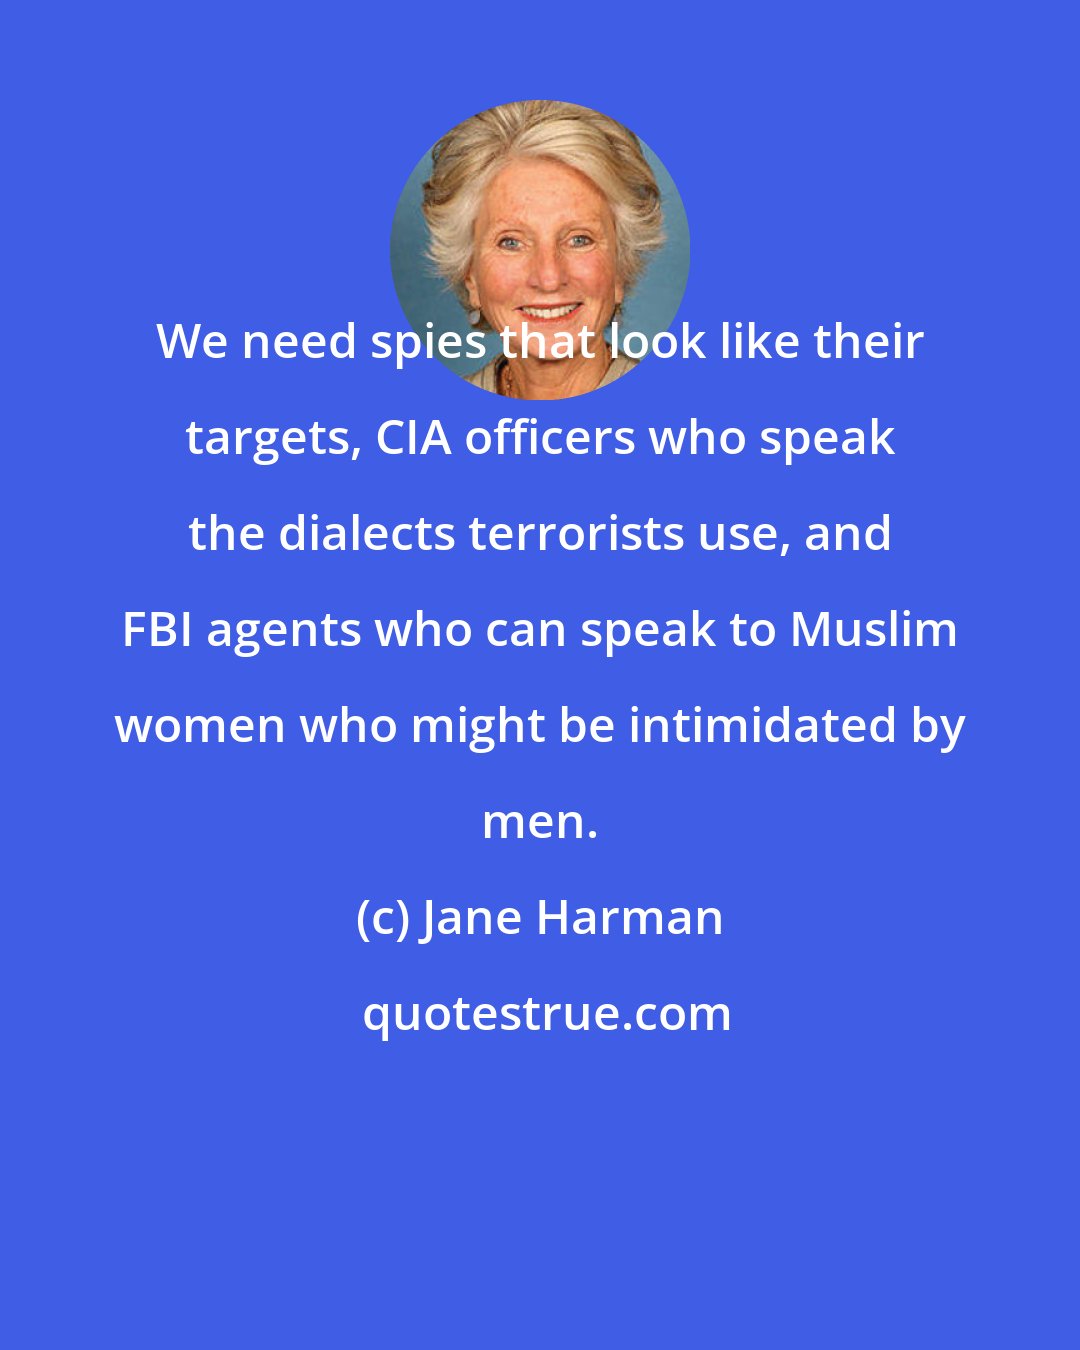 Jane Harman: We need spies that look like their targets, CIA officers who speak the dialects terrorists use, and FBI agents who can speak to Muslim women who might be intimidated by men.